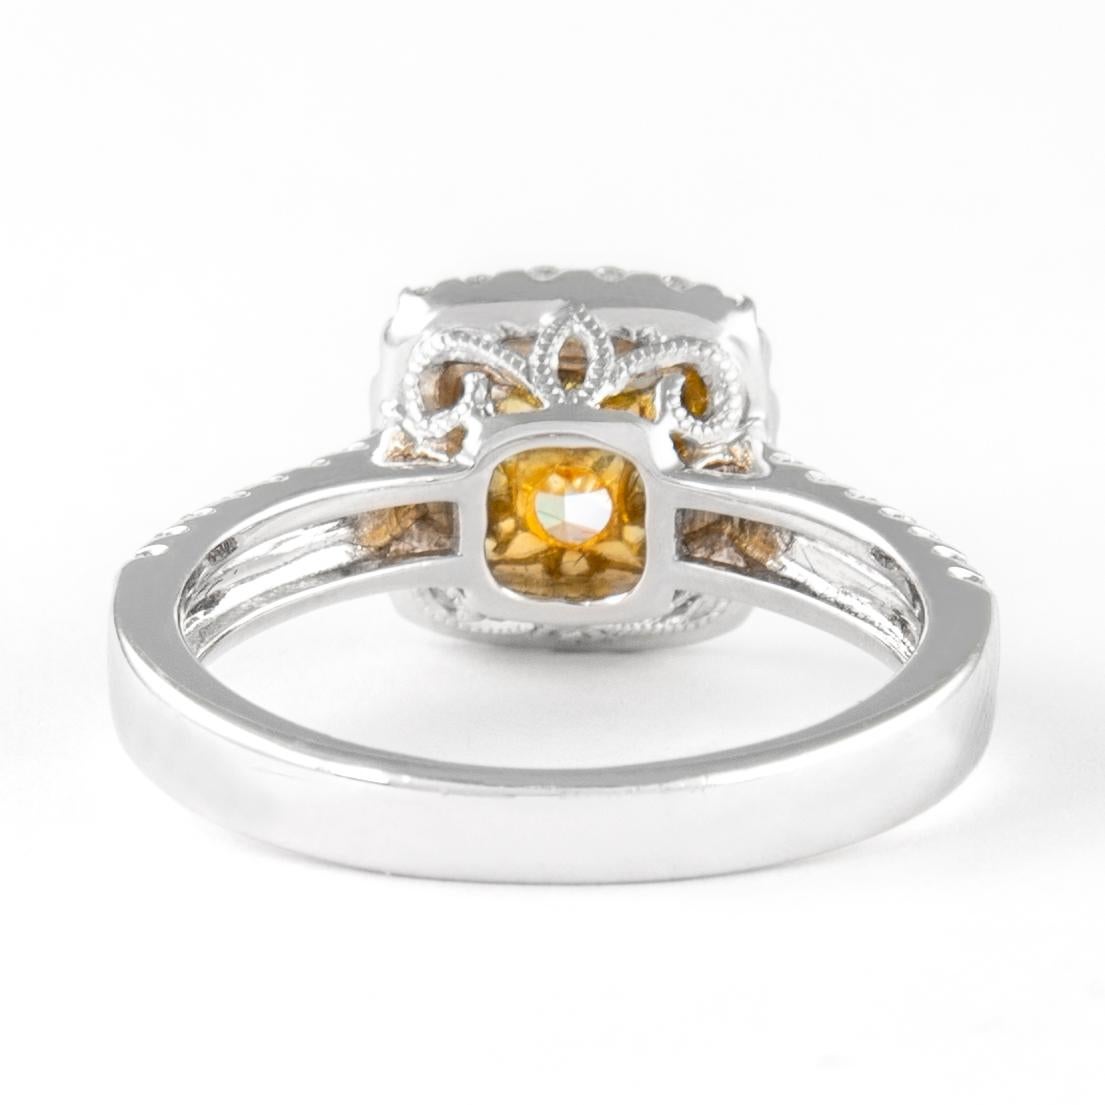 Alexander 1.41ct Fancy Intense Yellow Cushion VVS2 Diamond with Halo Ring 18k In New Condition For Sale In BEVERLY HILLS, CA